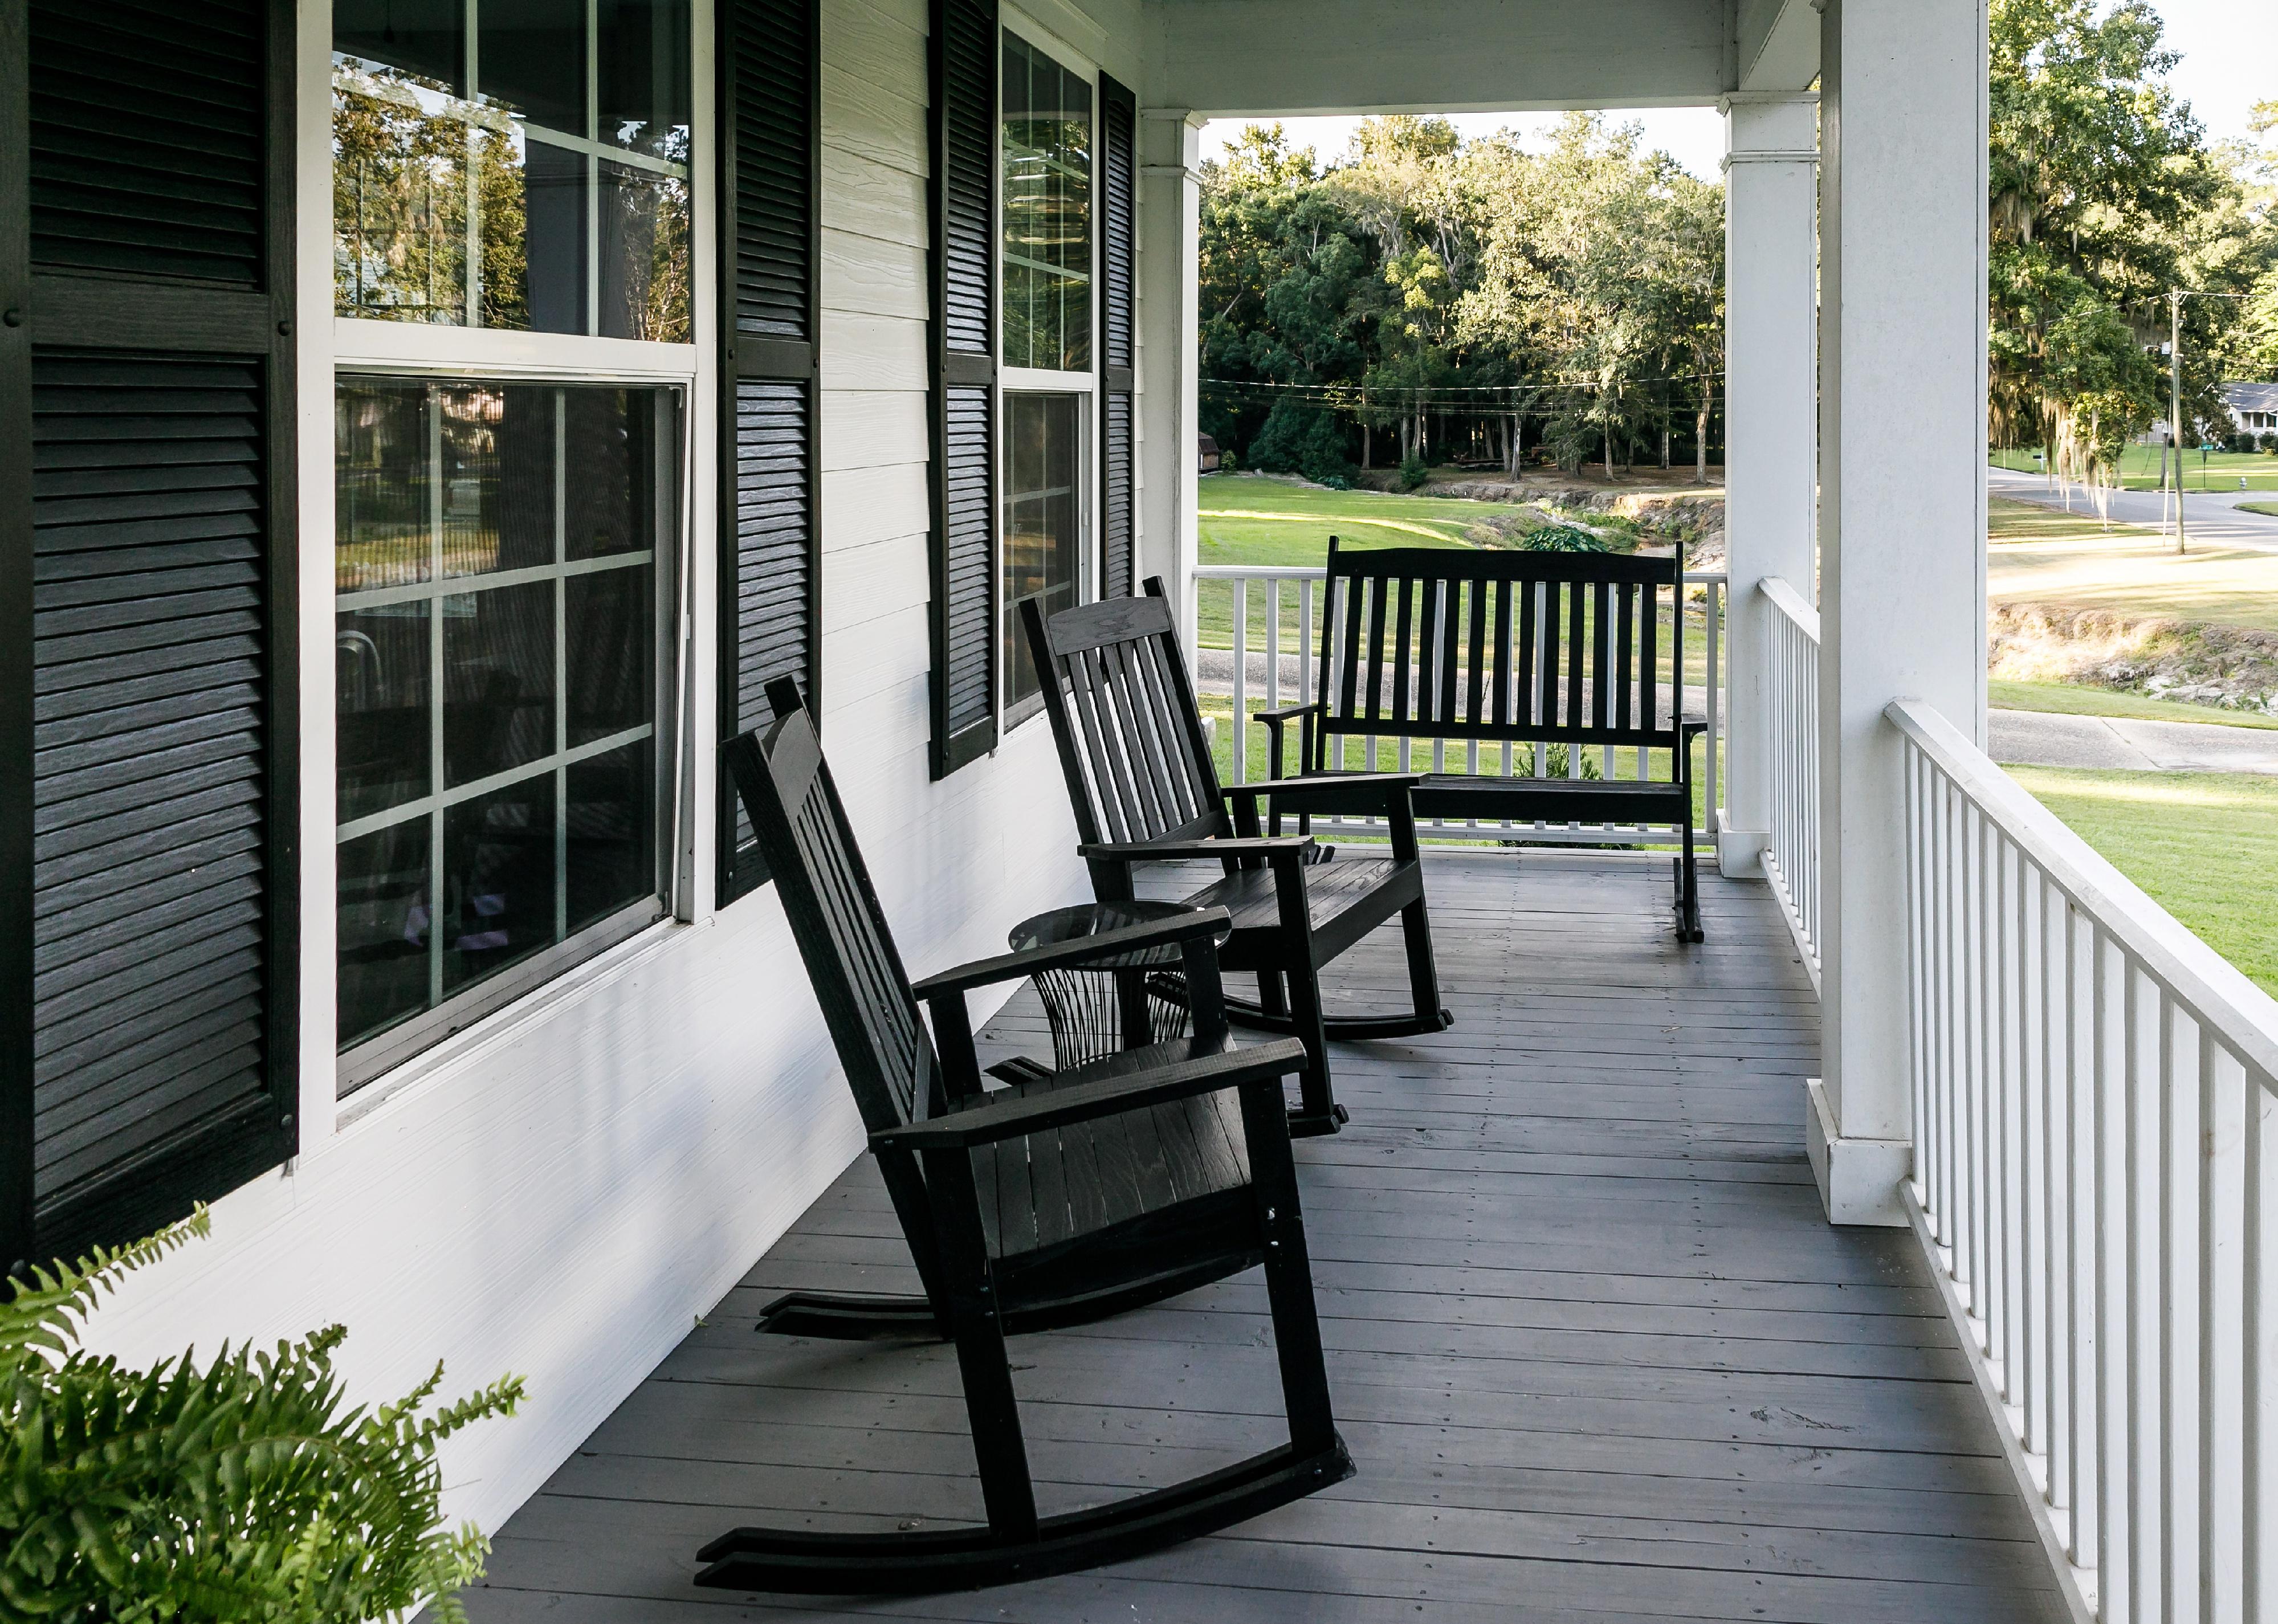 Front porch of Southern home with black rocking chairs.